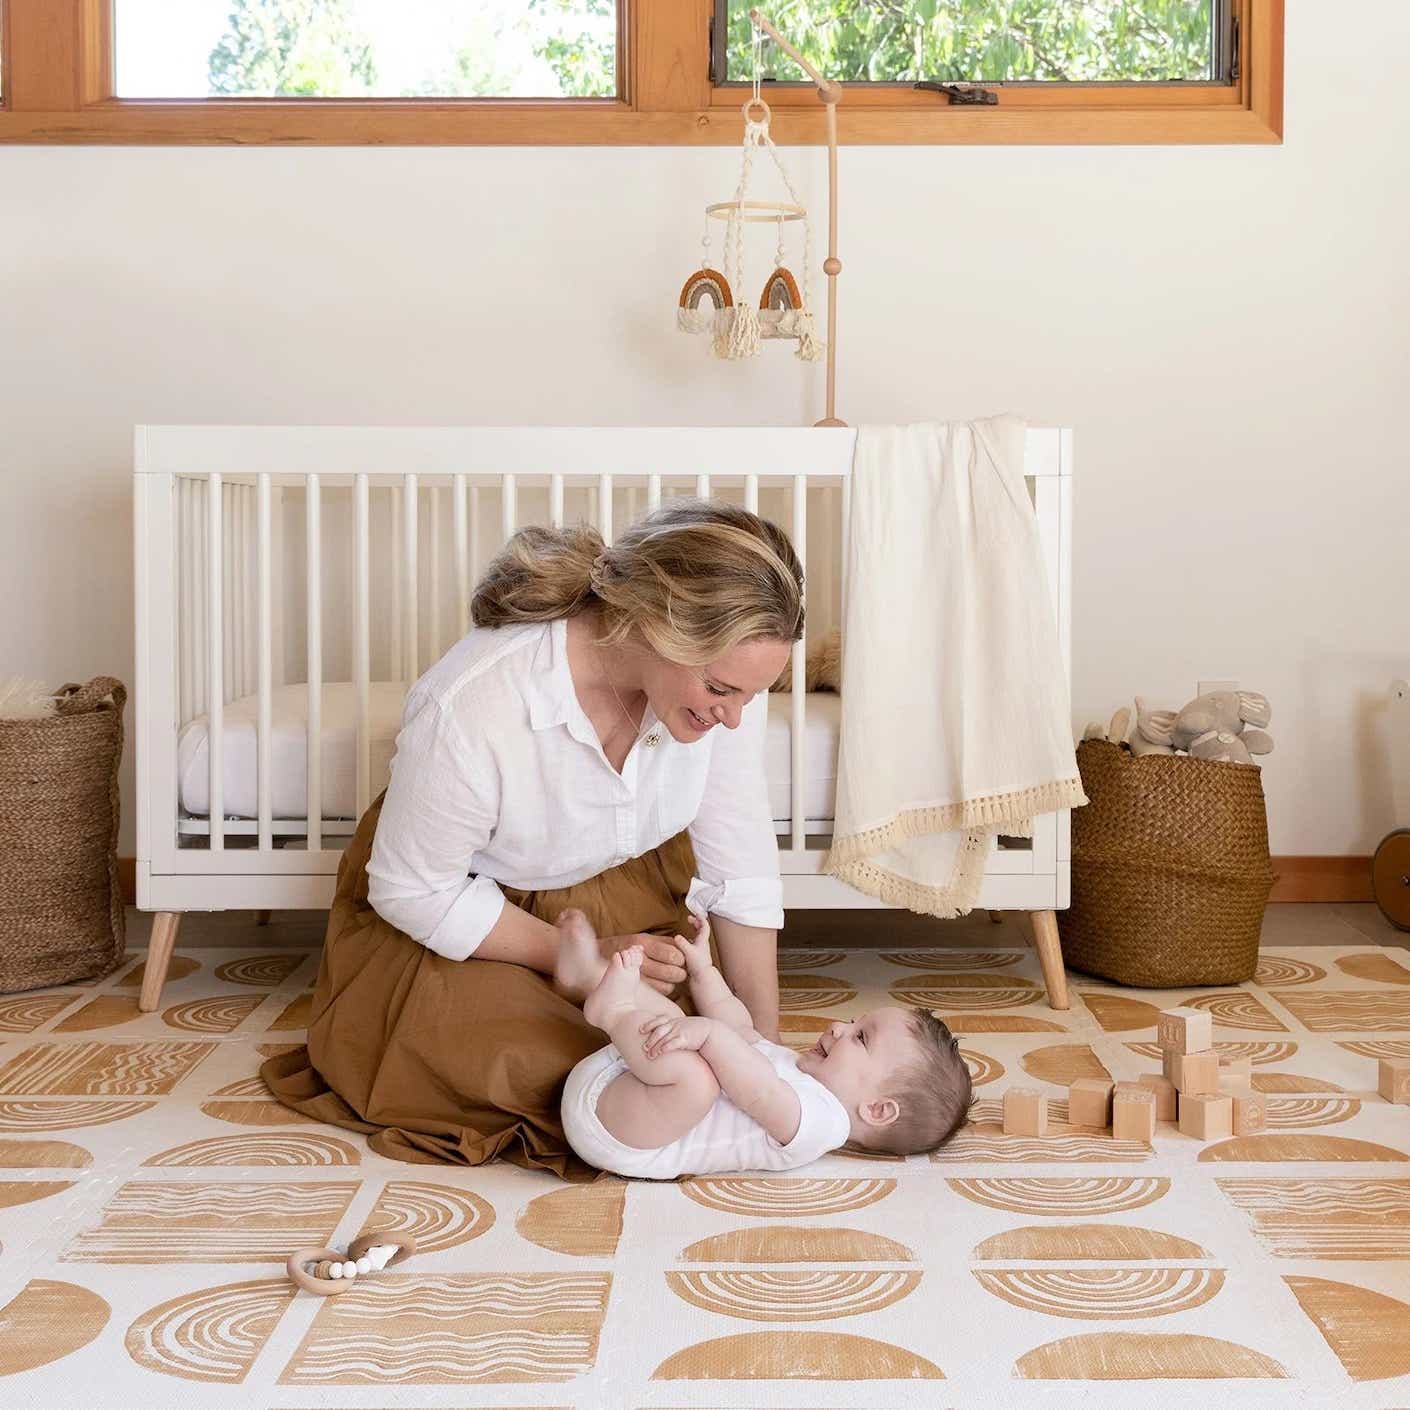 A mother and baby on a floor mat